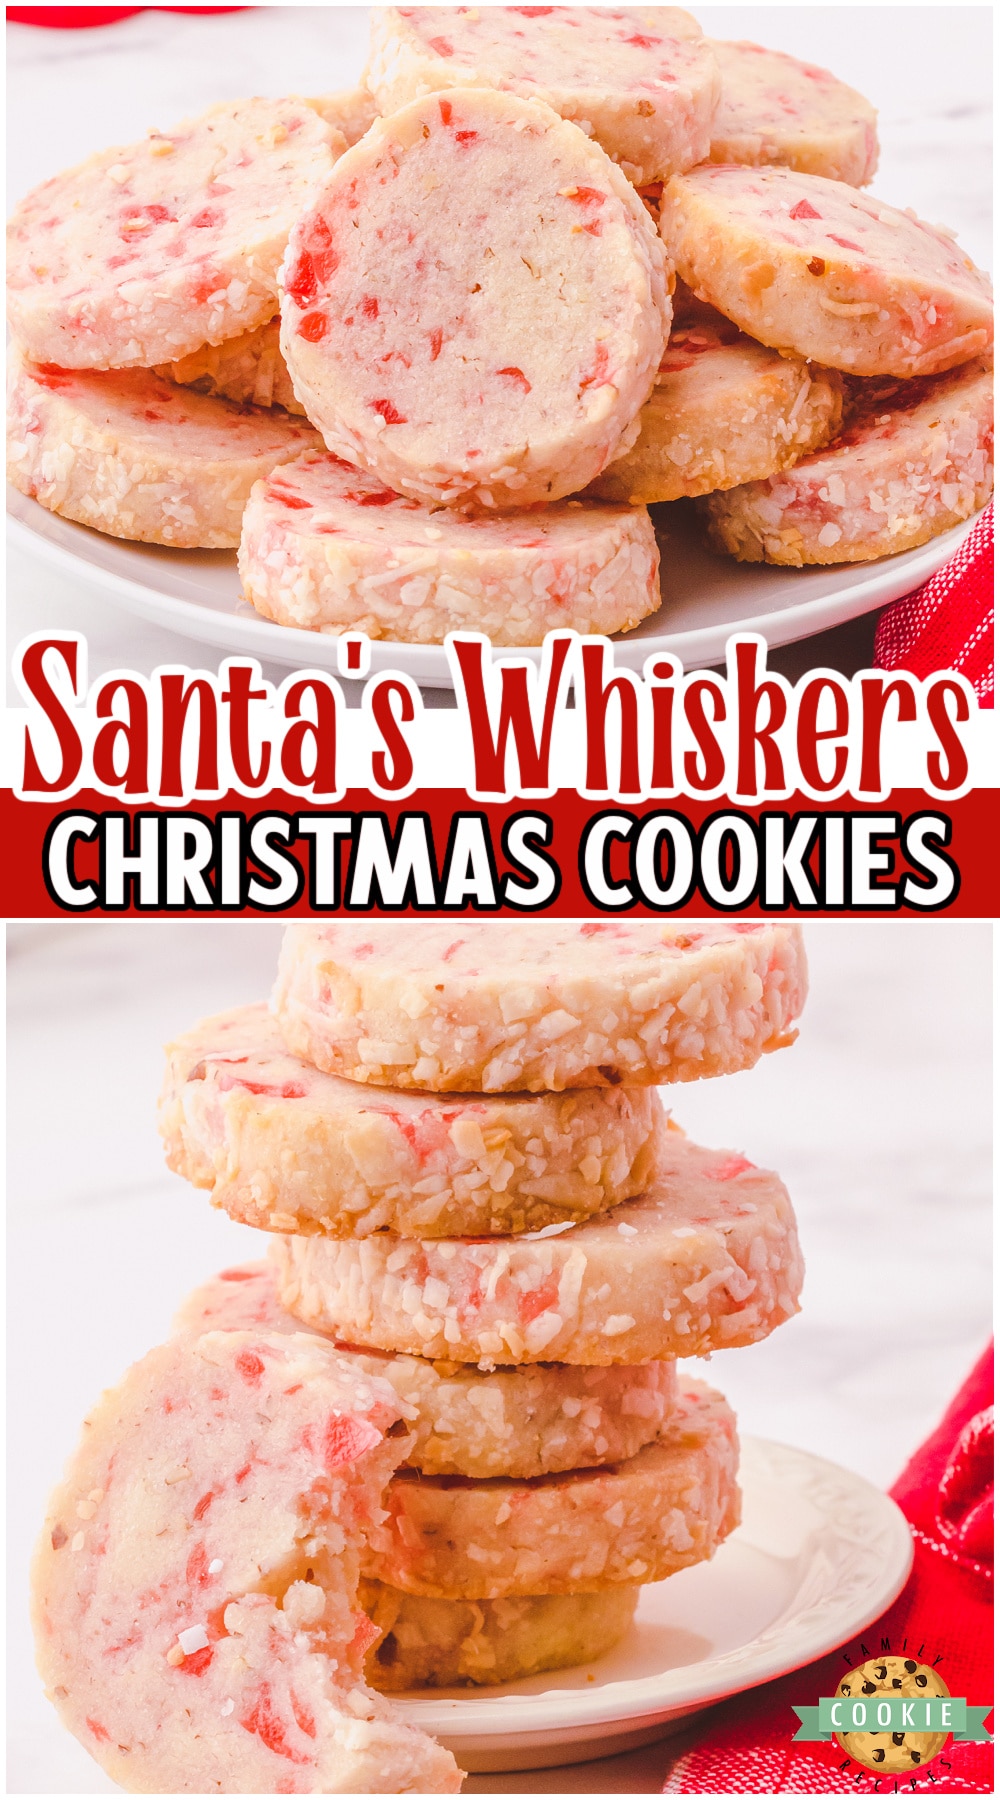 Santa's Whiskers Cookies are buttery cookies made with sweet cherries & pecans, then rolled in coconut for the classic look! Delicious slice and bake shortbread cookies made festive for Christmas! 